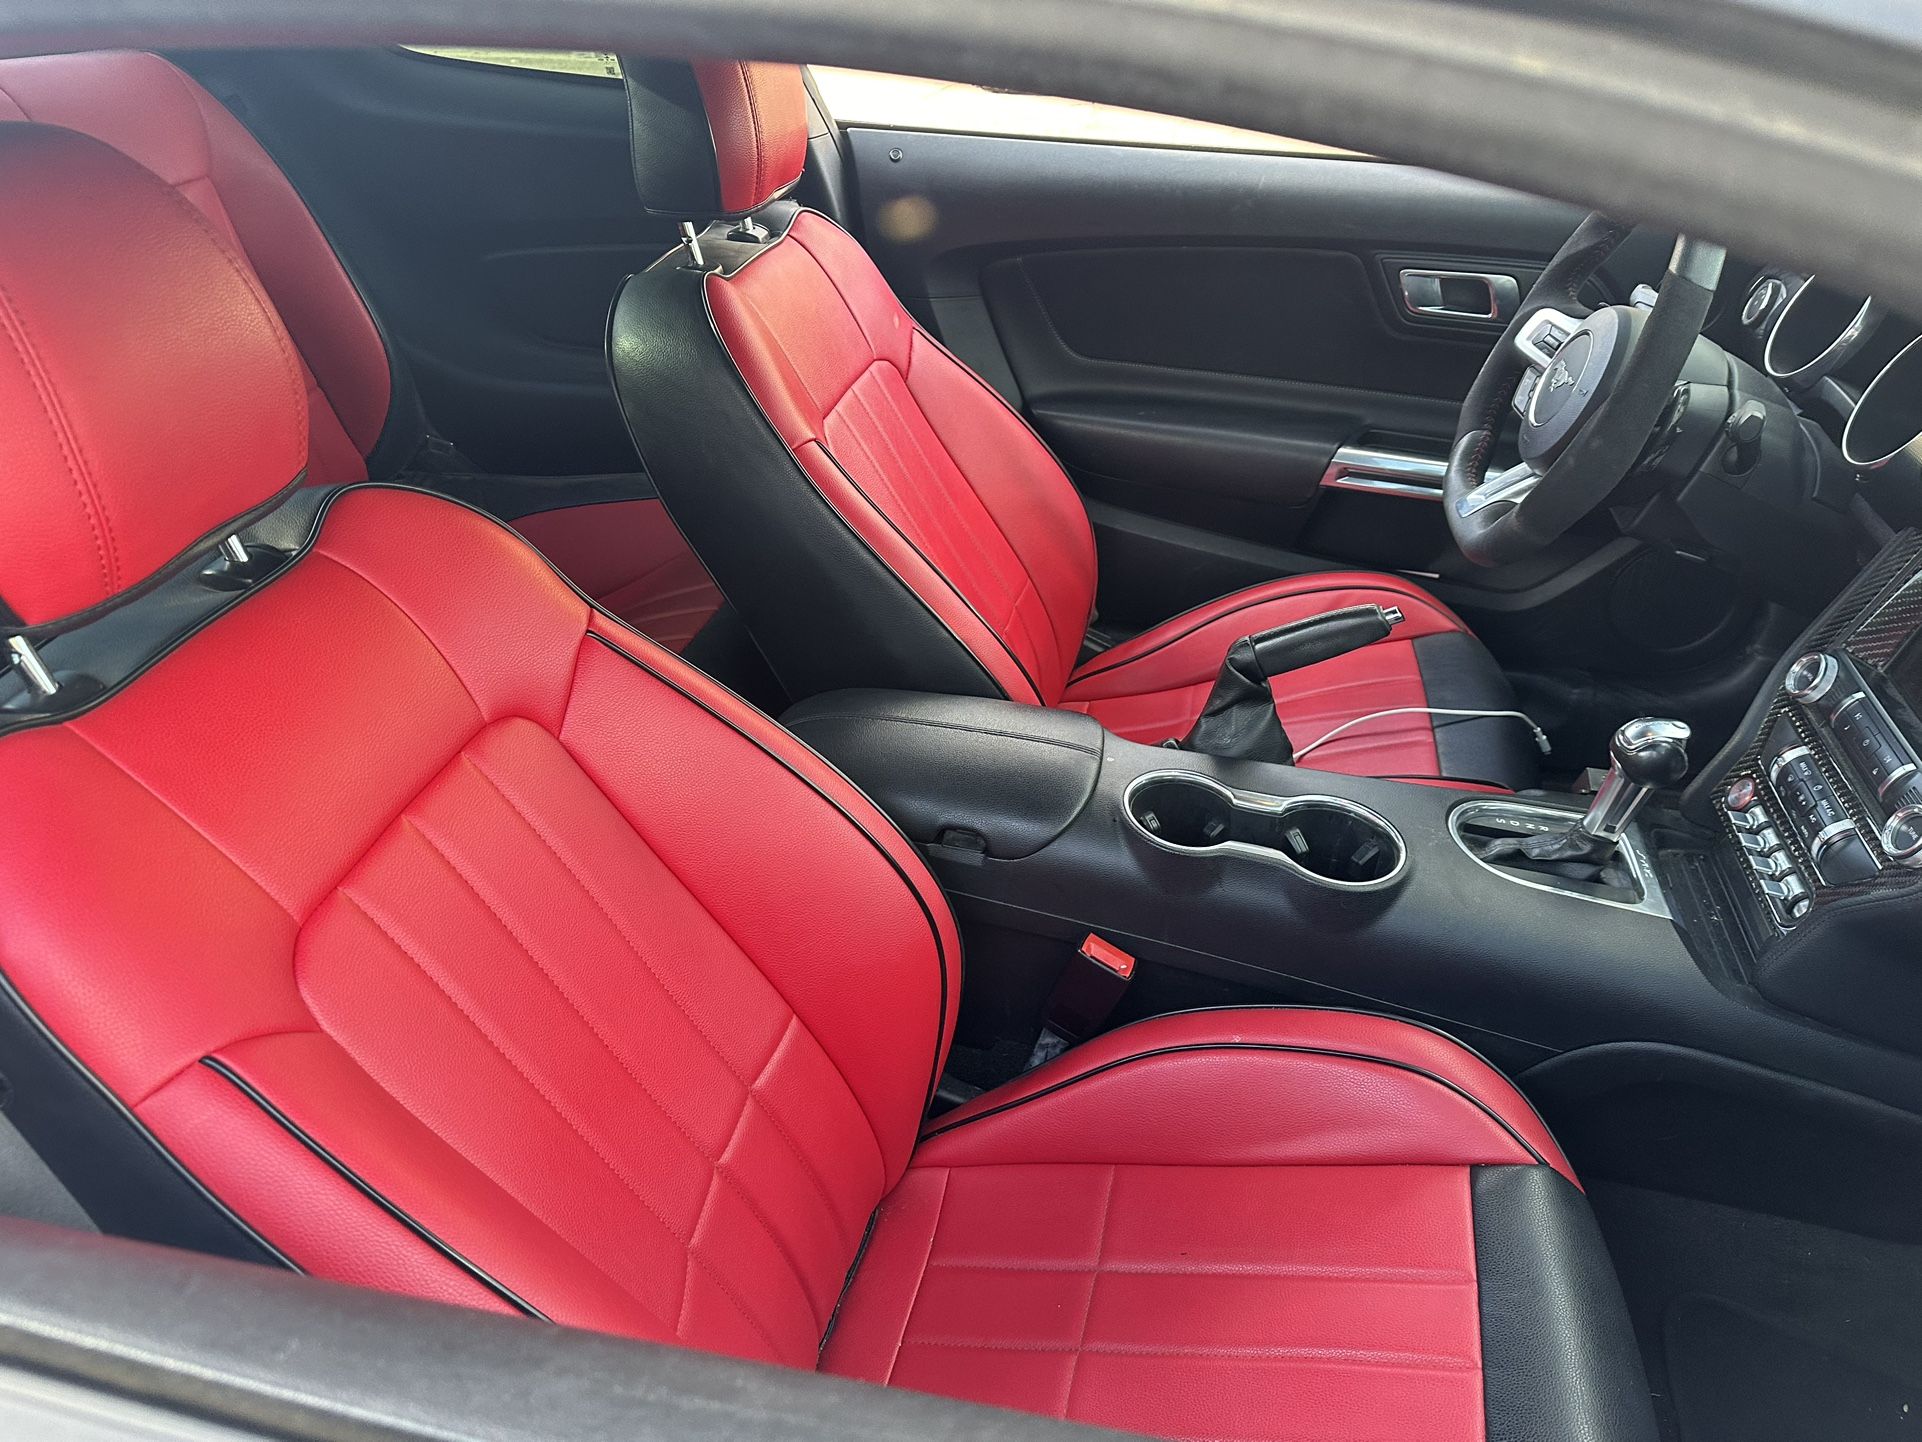 Ford Mustang s550 red leather seat covers